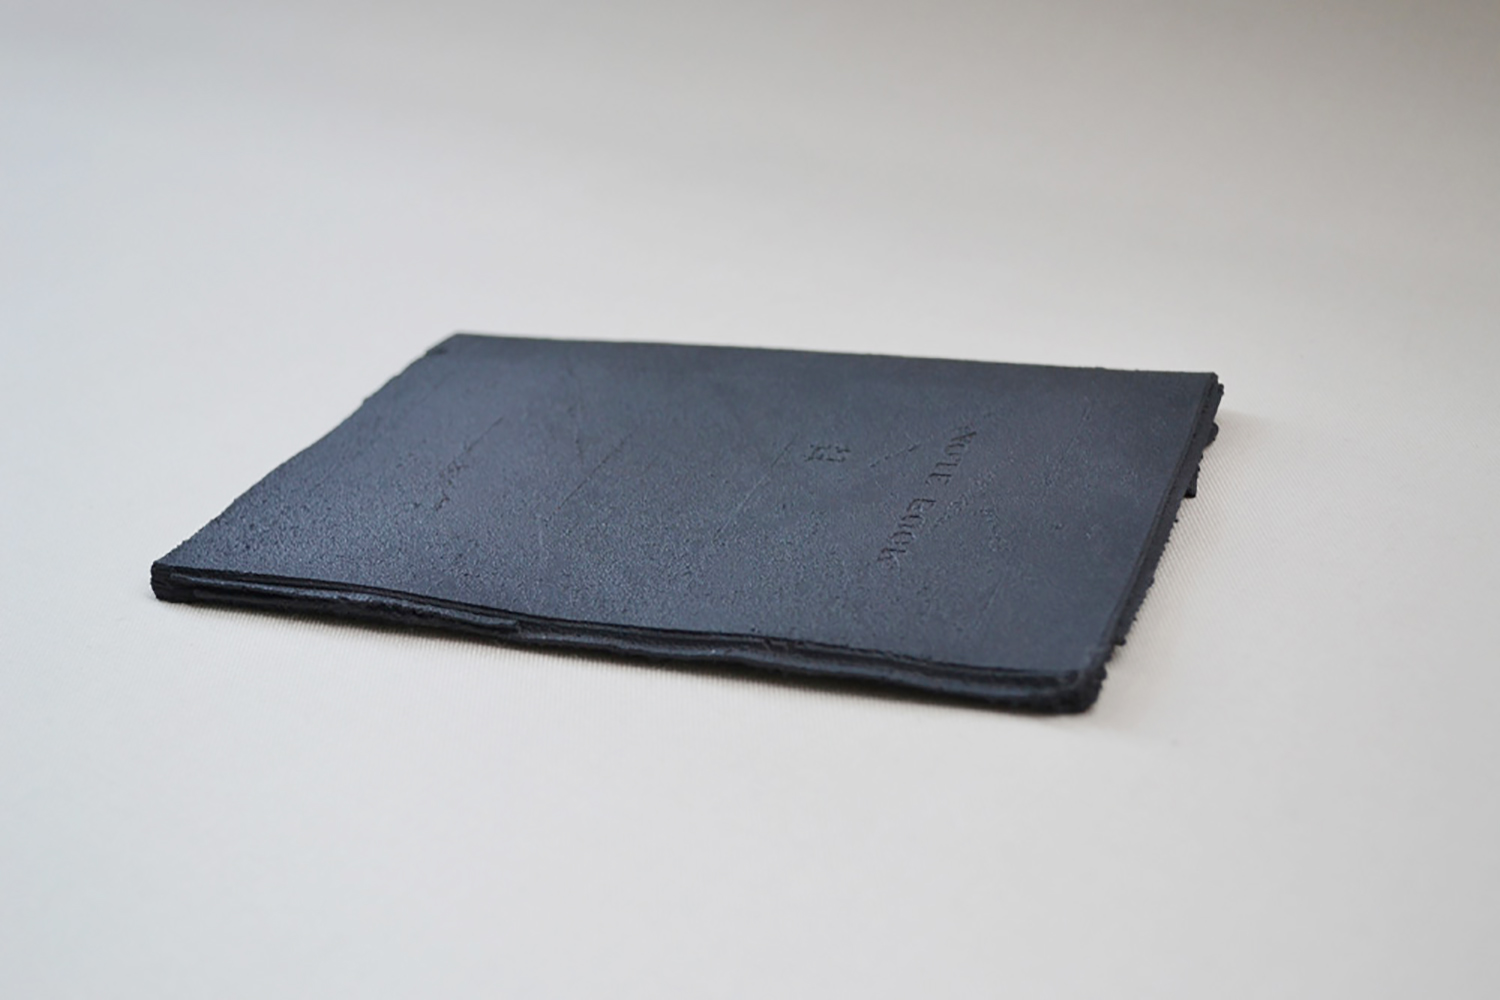 note book #37｜cast iron｜150 x 115 x 8 mm｜2015<br>¥50.000 - 180,000